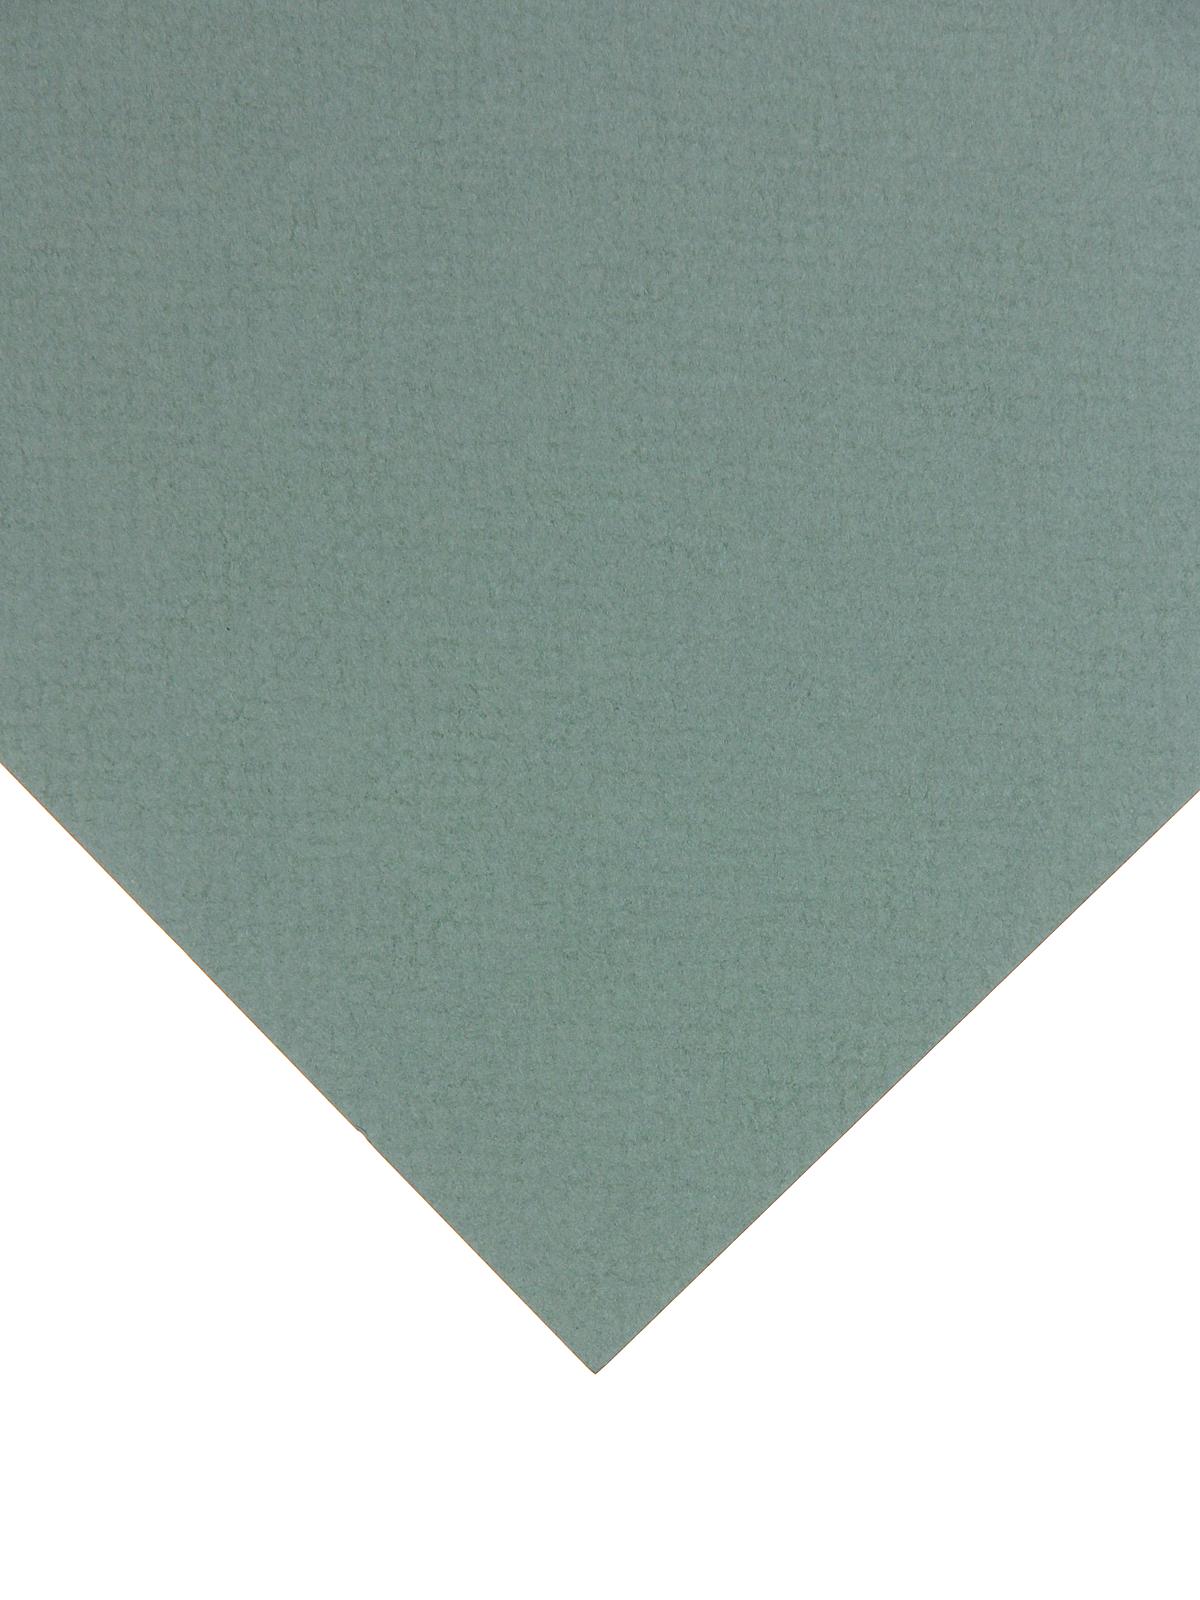 Mi-Teintes Tinted Paper Sage Green 8.5 In. X 11 In.